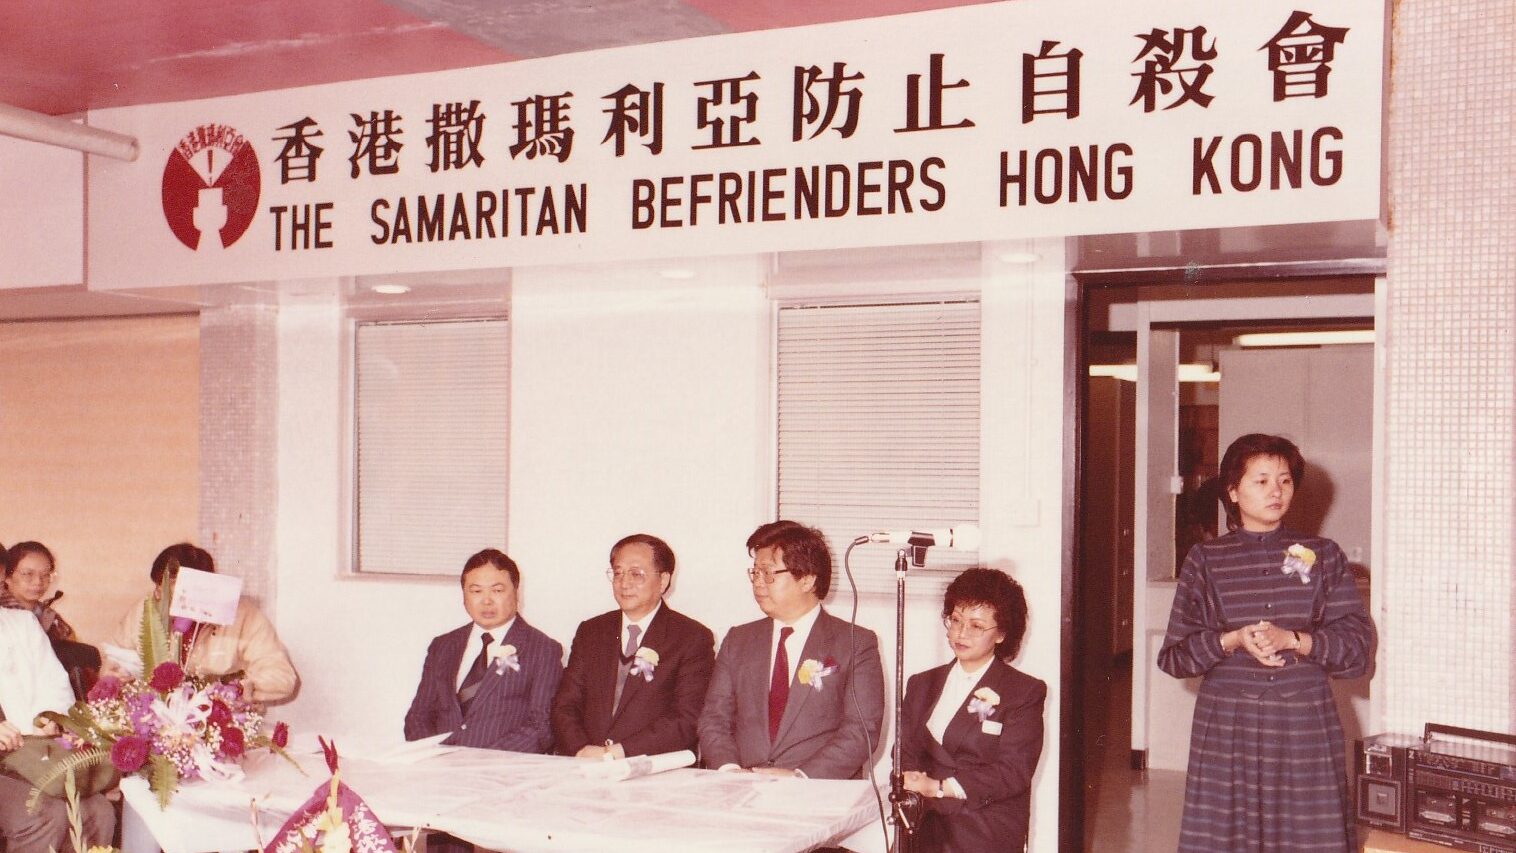 The Grand Opening Ceremony Photo of the Shun Lee Estate Lee Foo House office